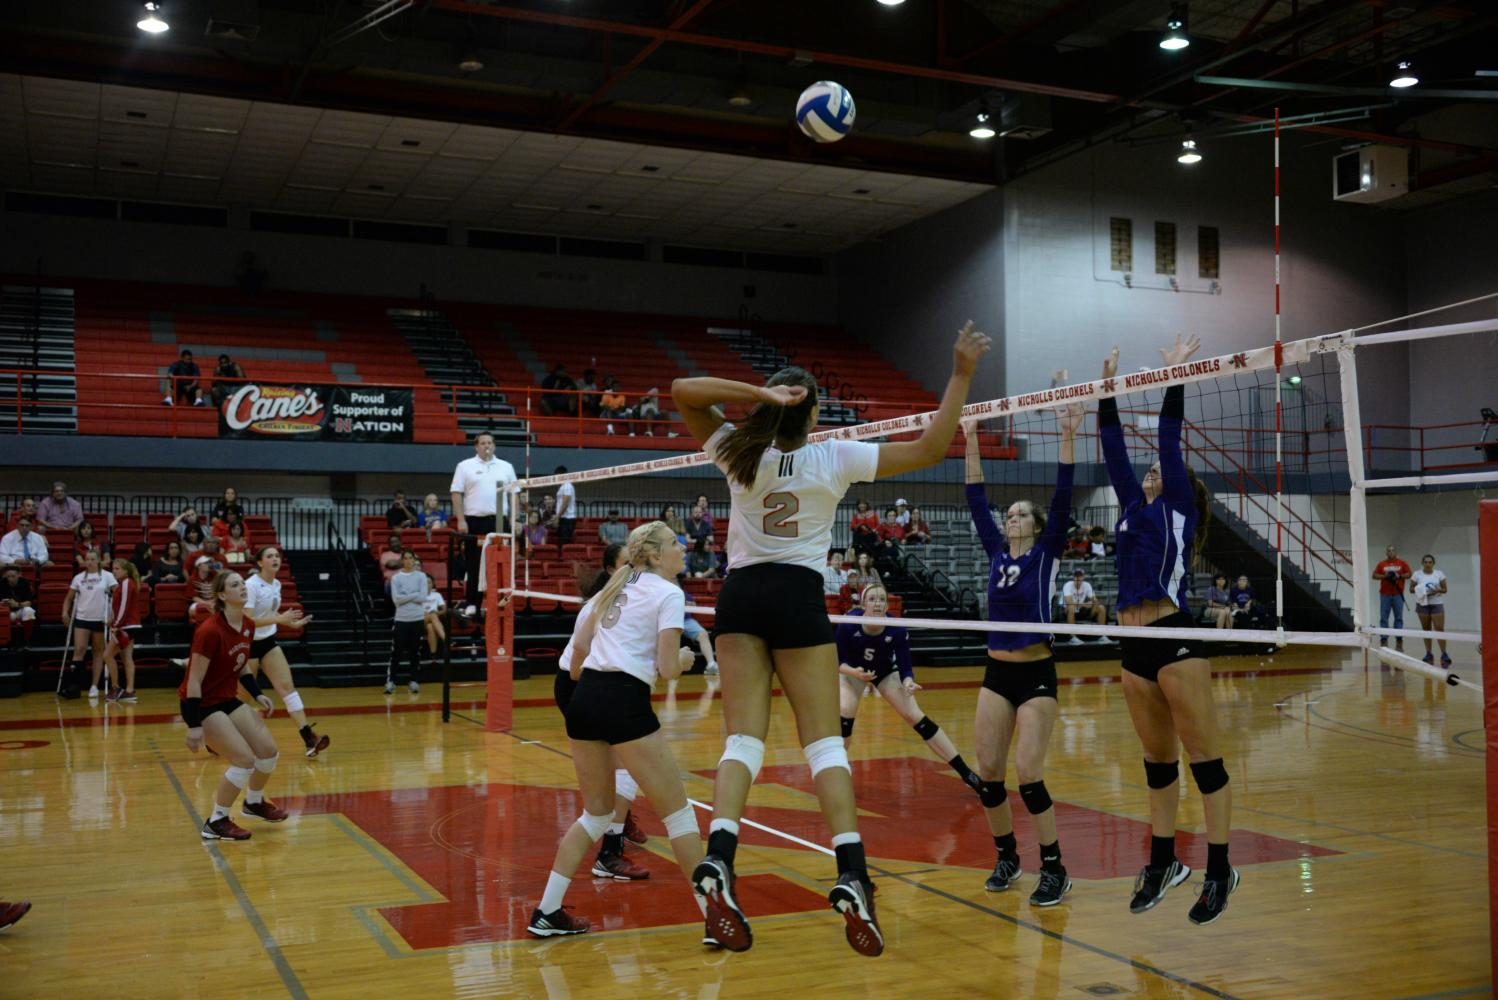 Brieanna Hill #2 a sophomore from Berwick spikes the ball durring the Nicholls Colonels Vs. the Arkansas Sugar Bears that was on Thursday, September 22nd at the Stopher gym.